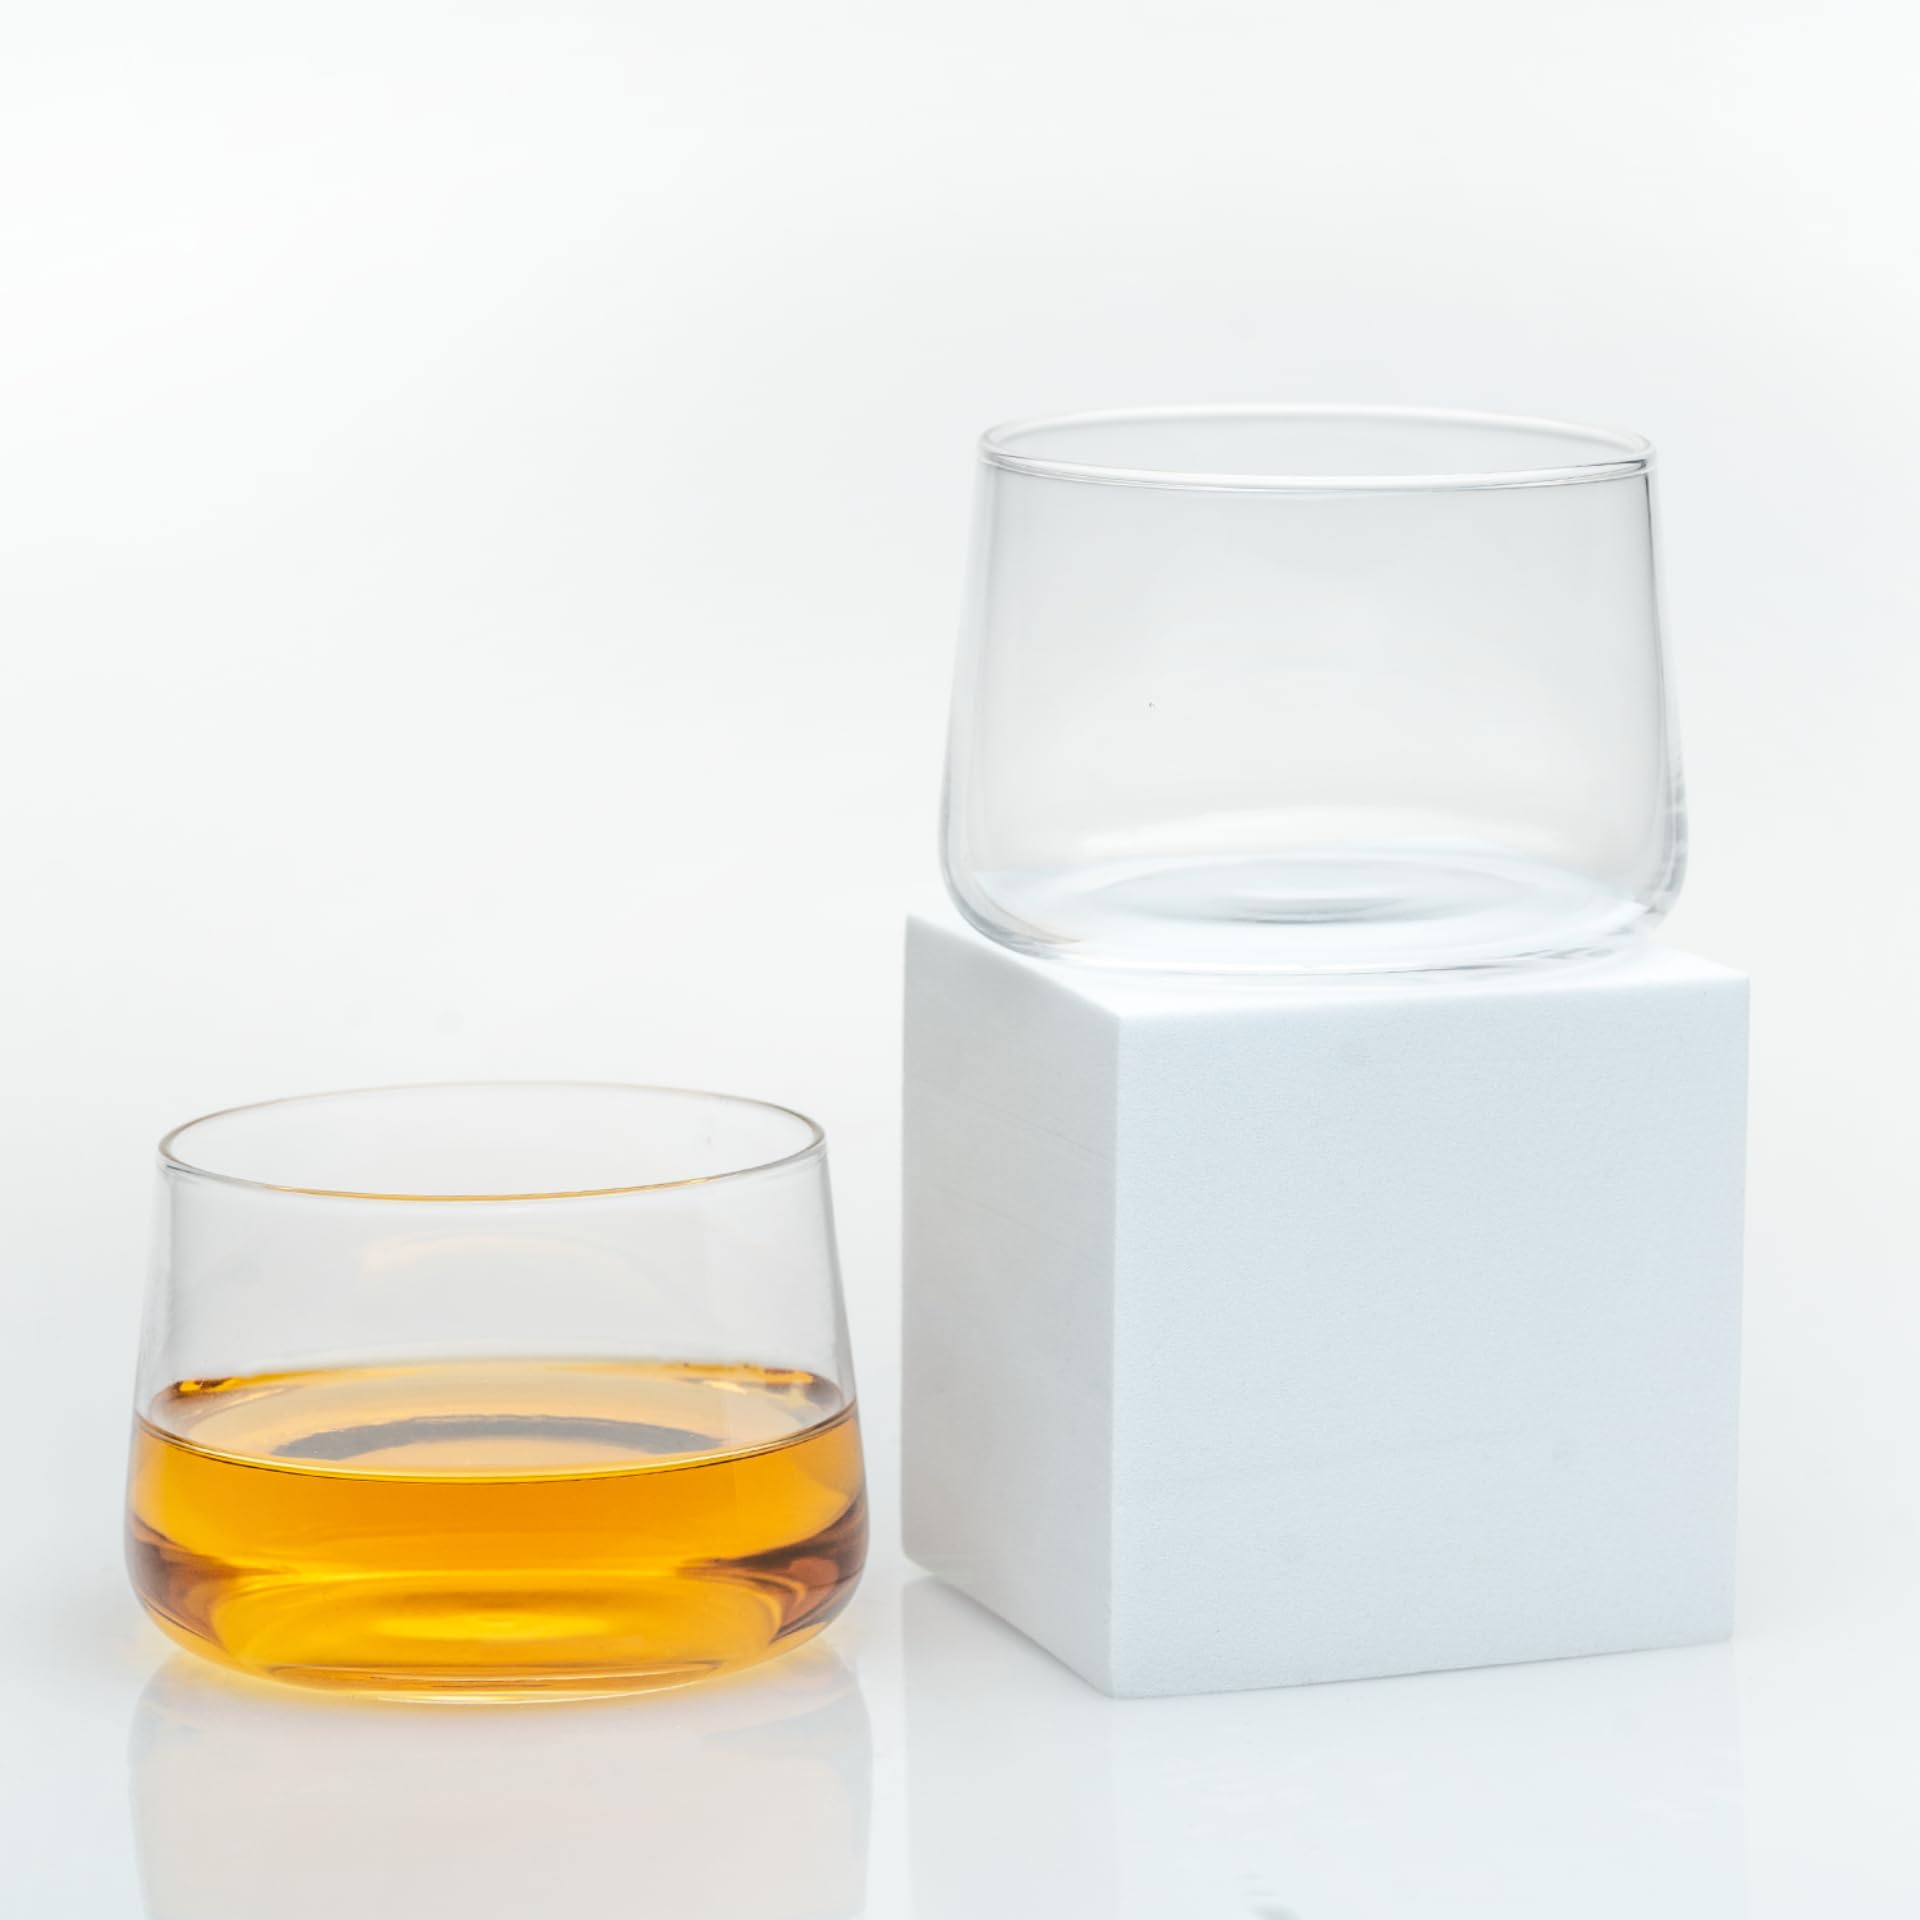 The TAG Store | Luxe Tasting Glasses Set of 2 | 8oz Whiskey Glasses | Modern Barware Collection | Pairs With Drinking and Mixer Glasses | Signature Old Fashioned Glasses | Whiskey Bourbon Scotch